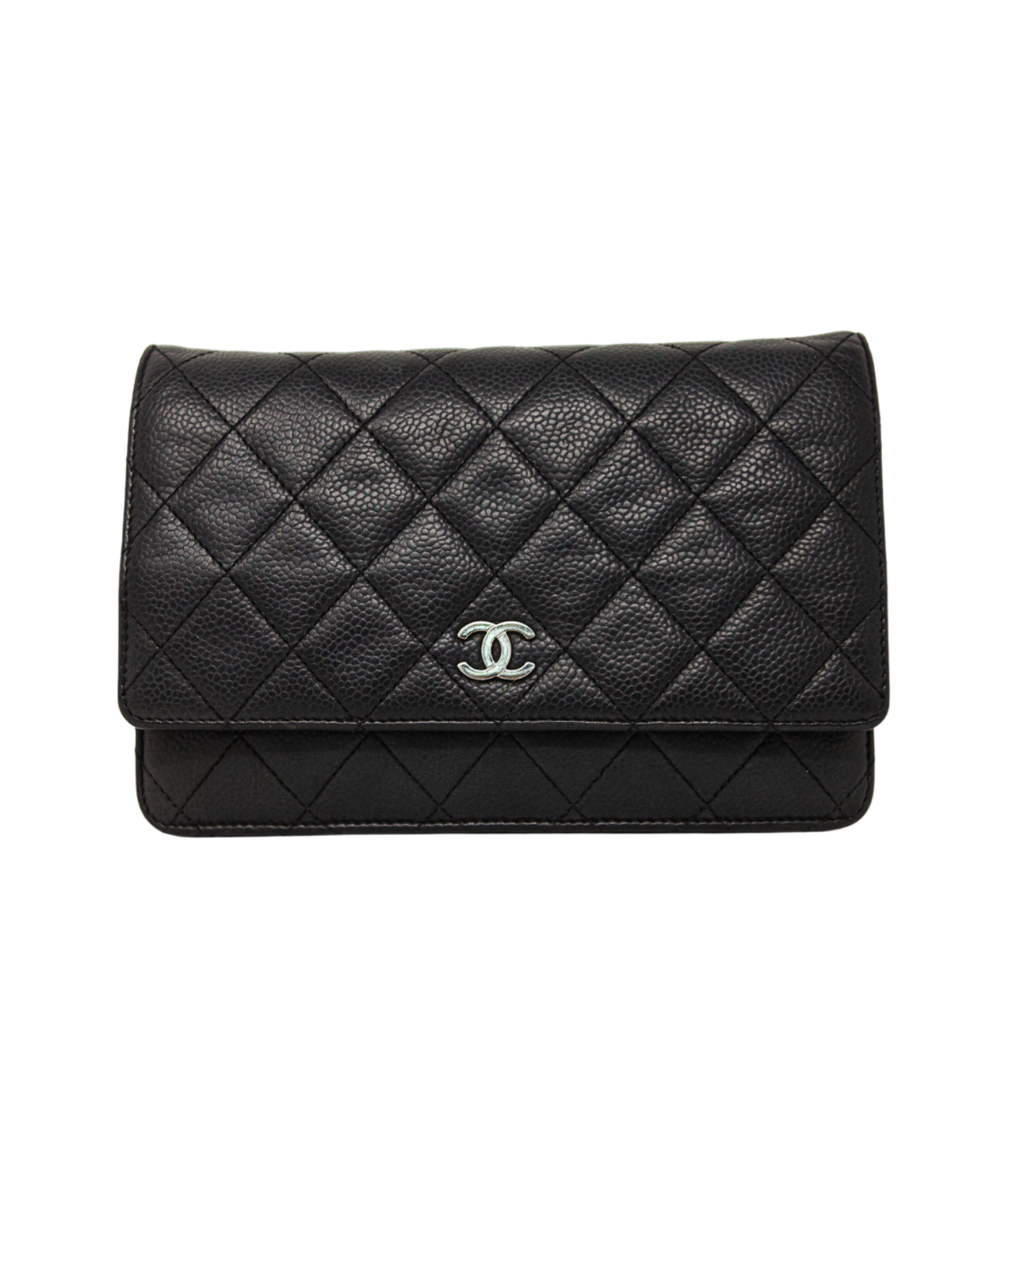 Chanel Black Caviar Leather Wallet On Chain Chanel